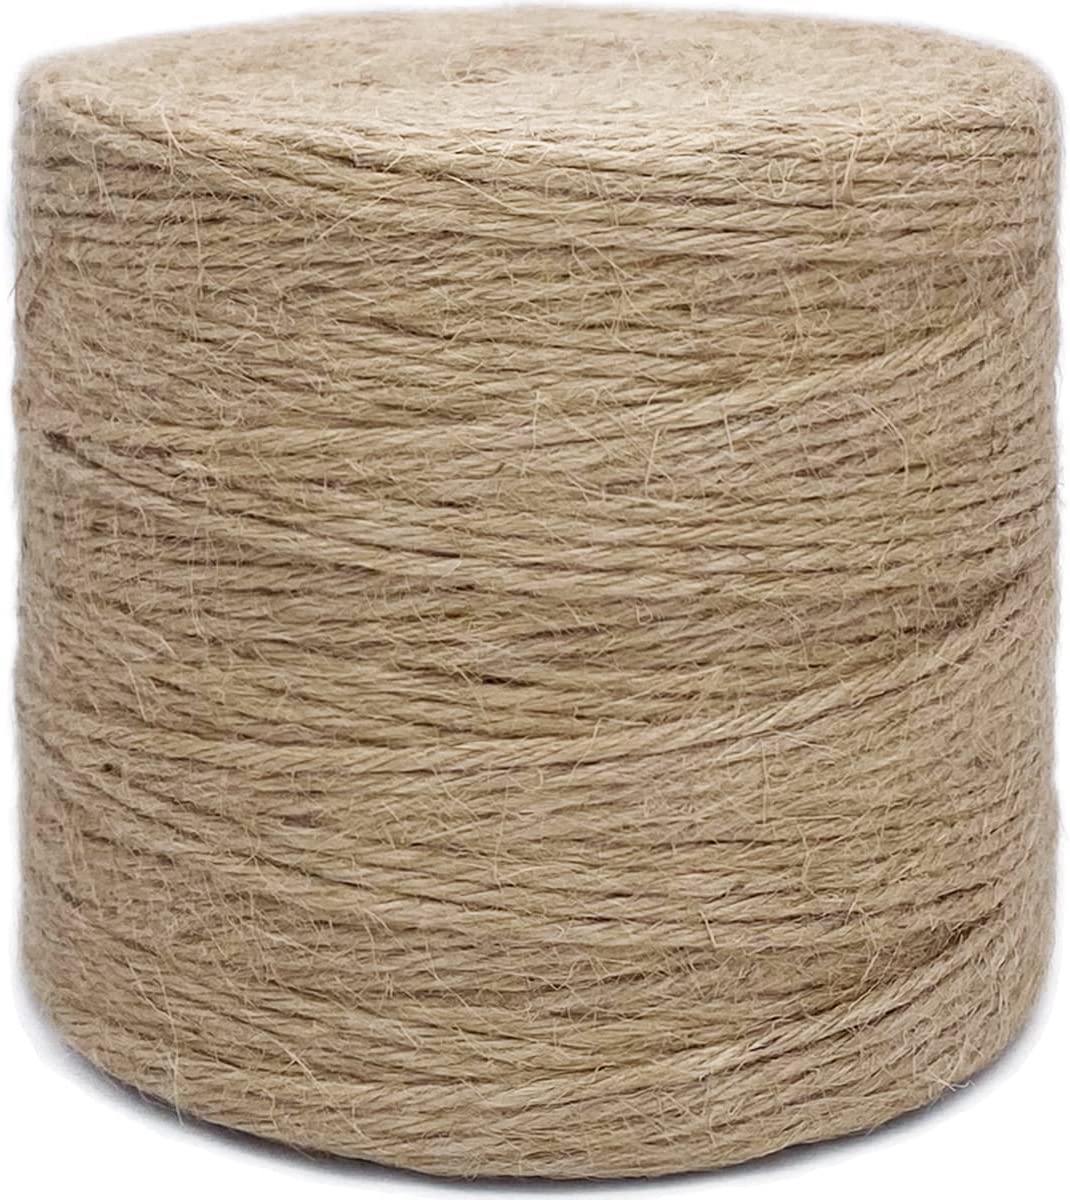 G2PLUS White String,Cotton Bakers Twine,328 Feet 2MM Natural White Cotton  String